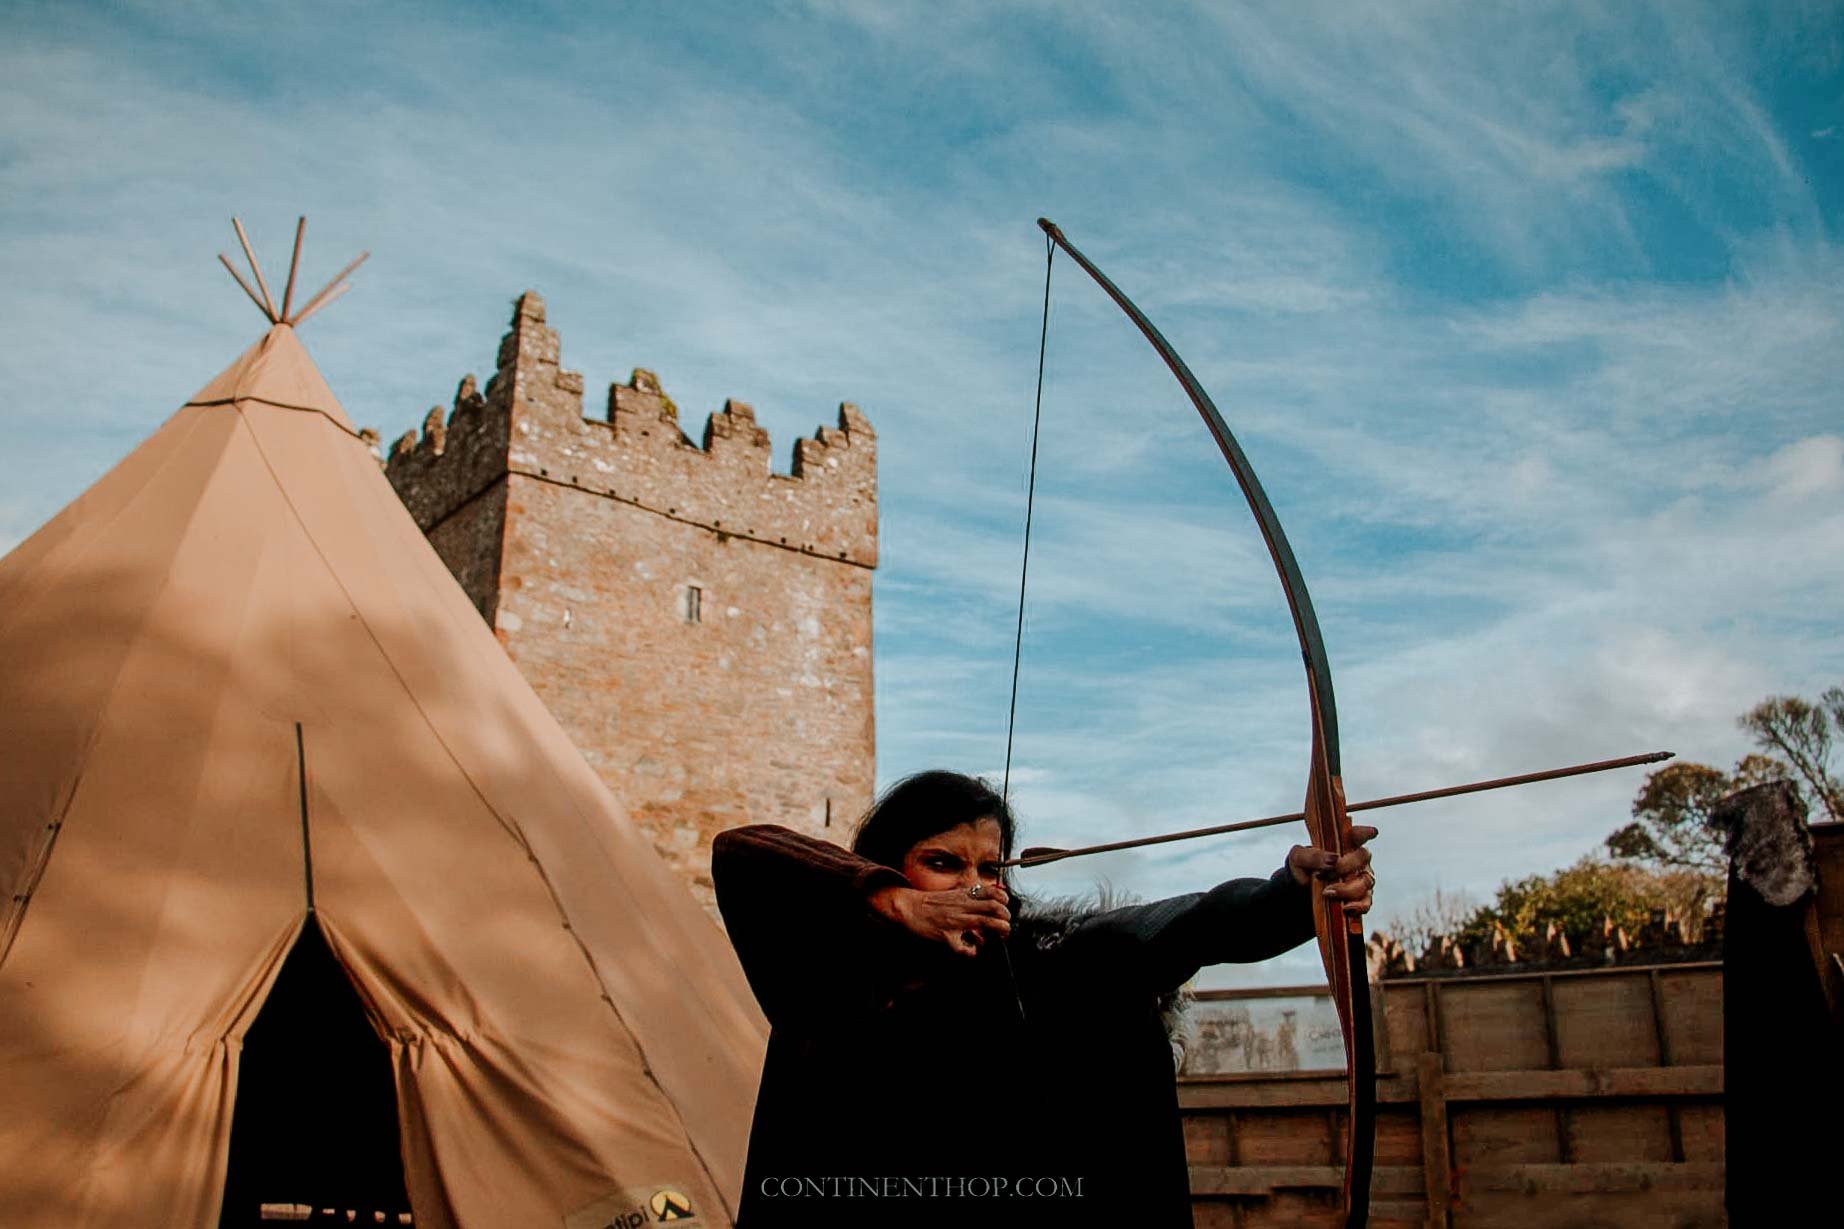 Woman shooting an arrow in front of tepee on a GOT locations in Northern Ireland visit